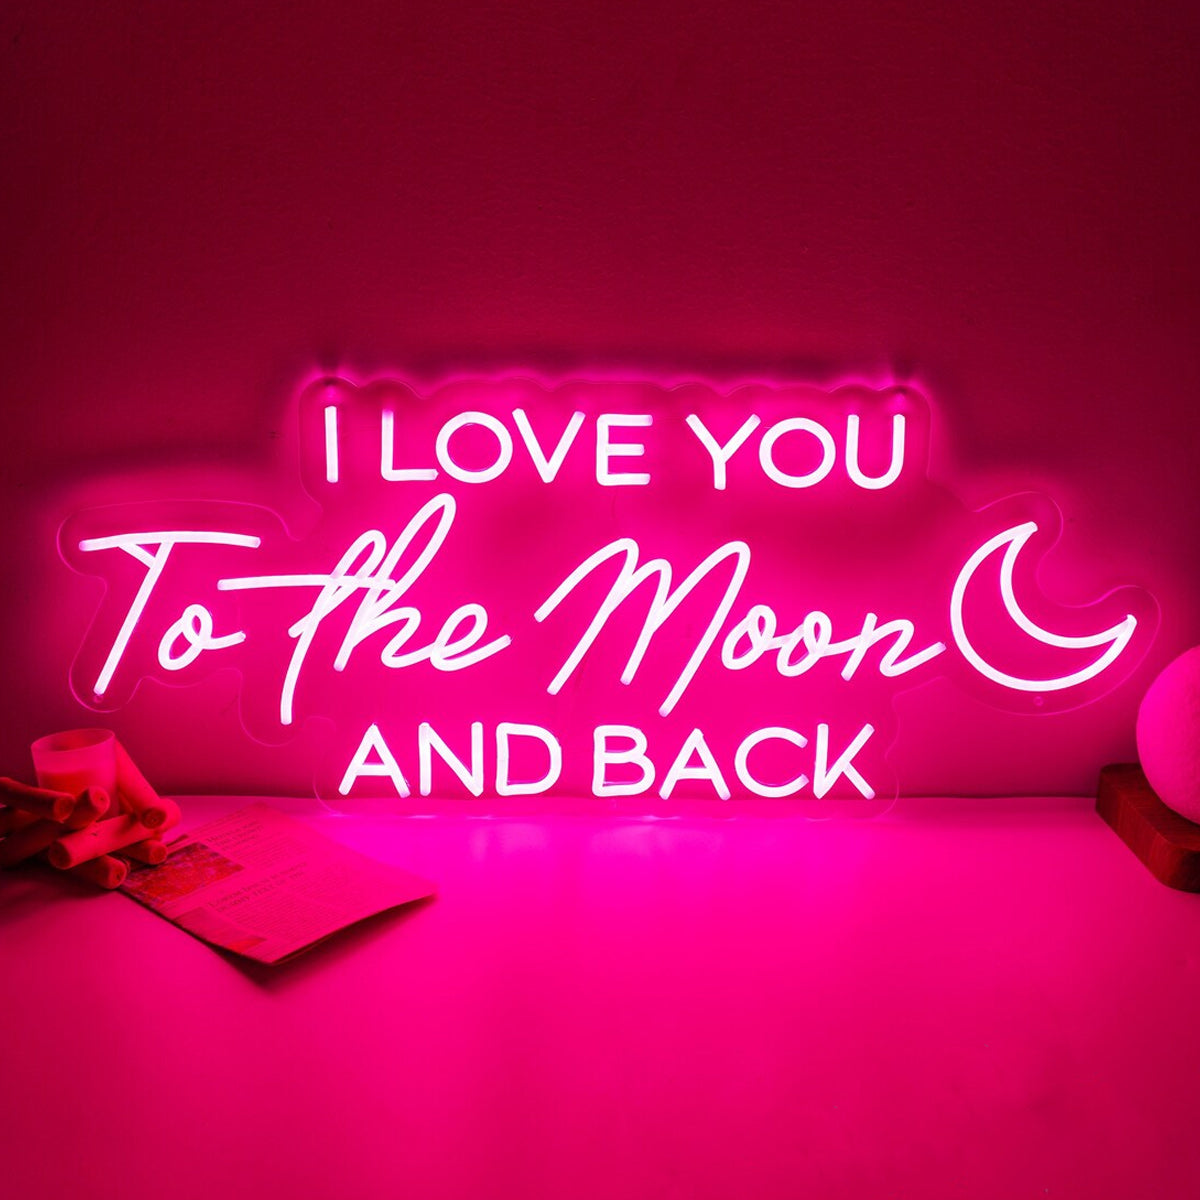 NEONIP-100% Handmade I Love You To The Moon And Back LED Neon Light Sign